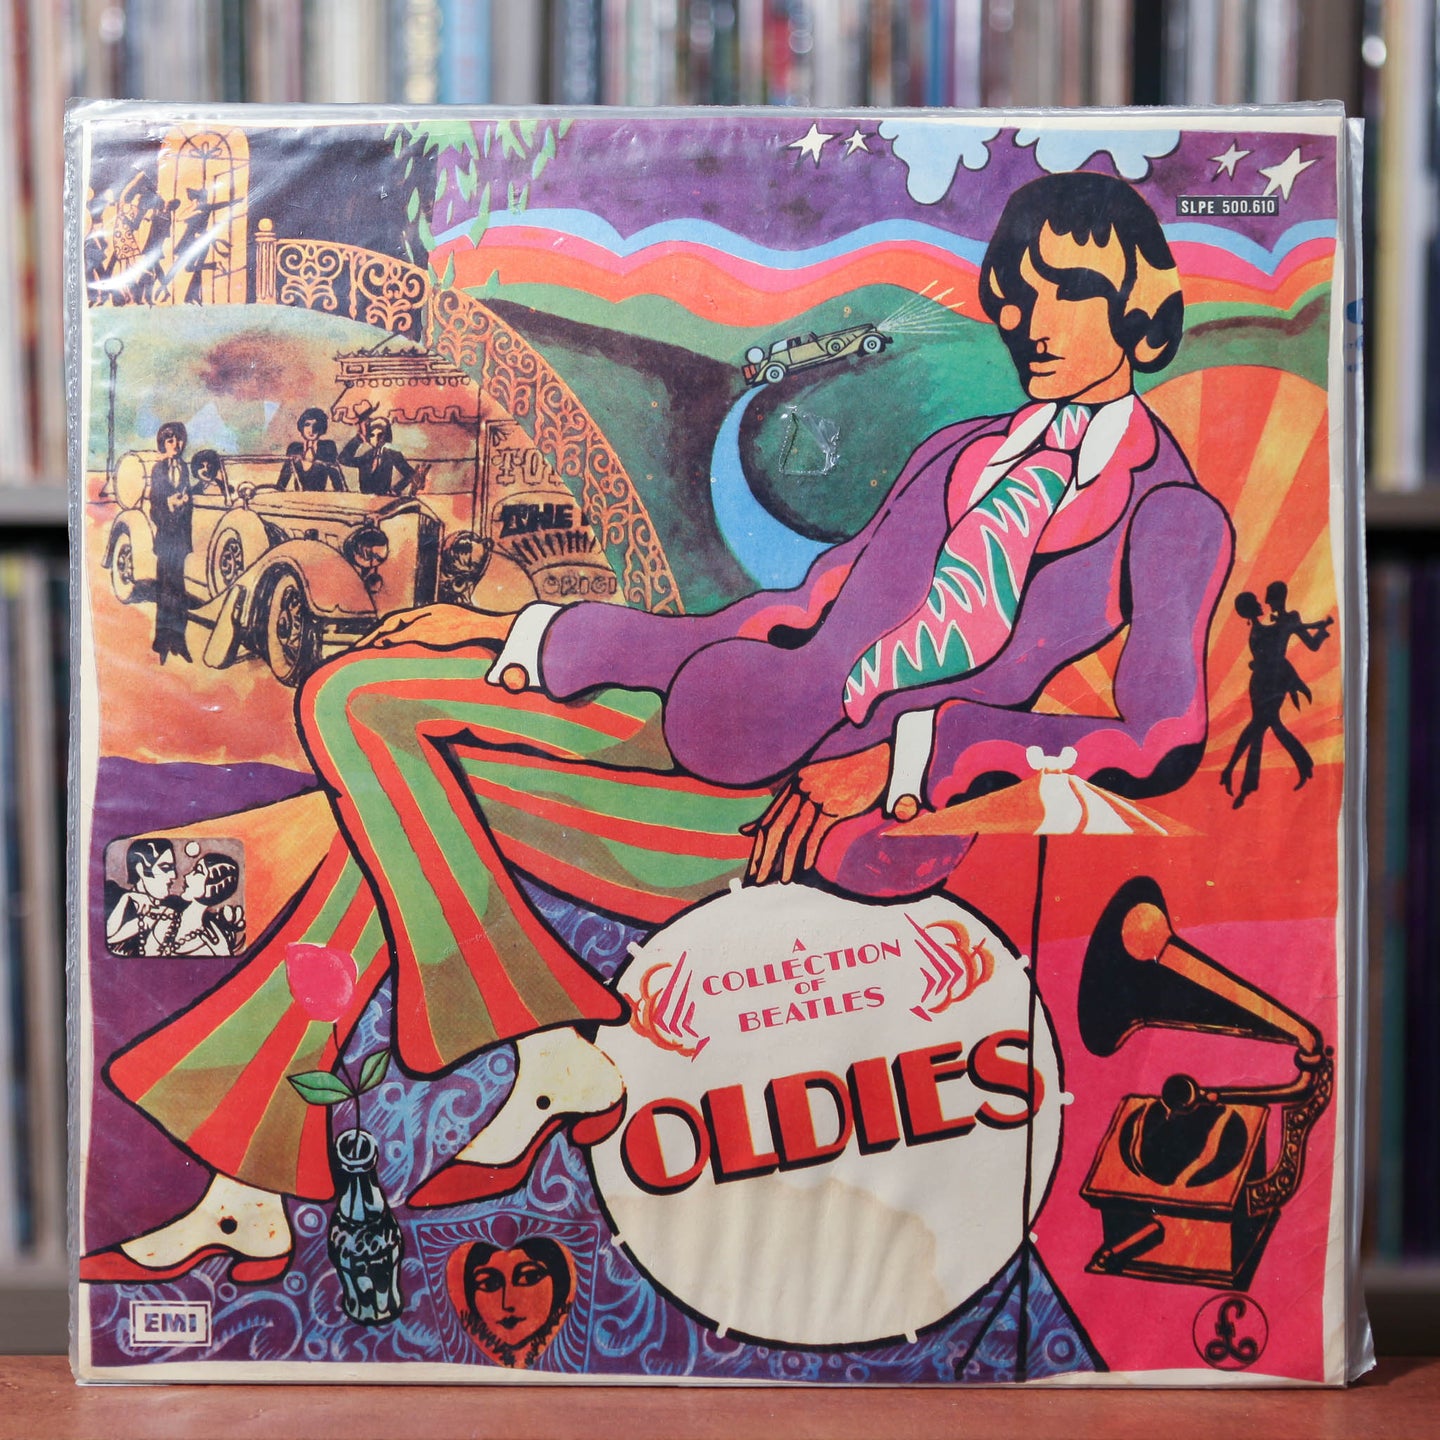 The Beatles - A Collection Of Beatles Oldies - Uruguay Import - 1976 EMI, VG+/VG+